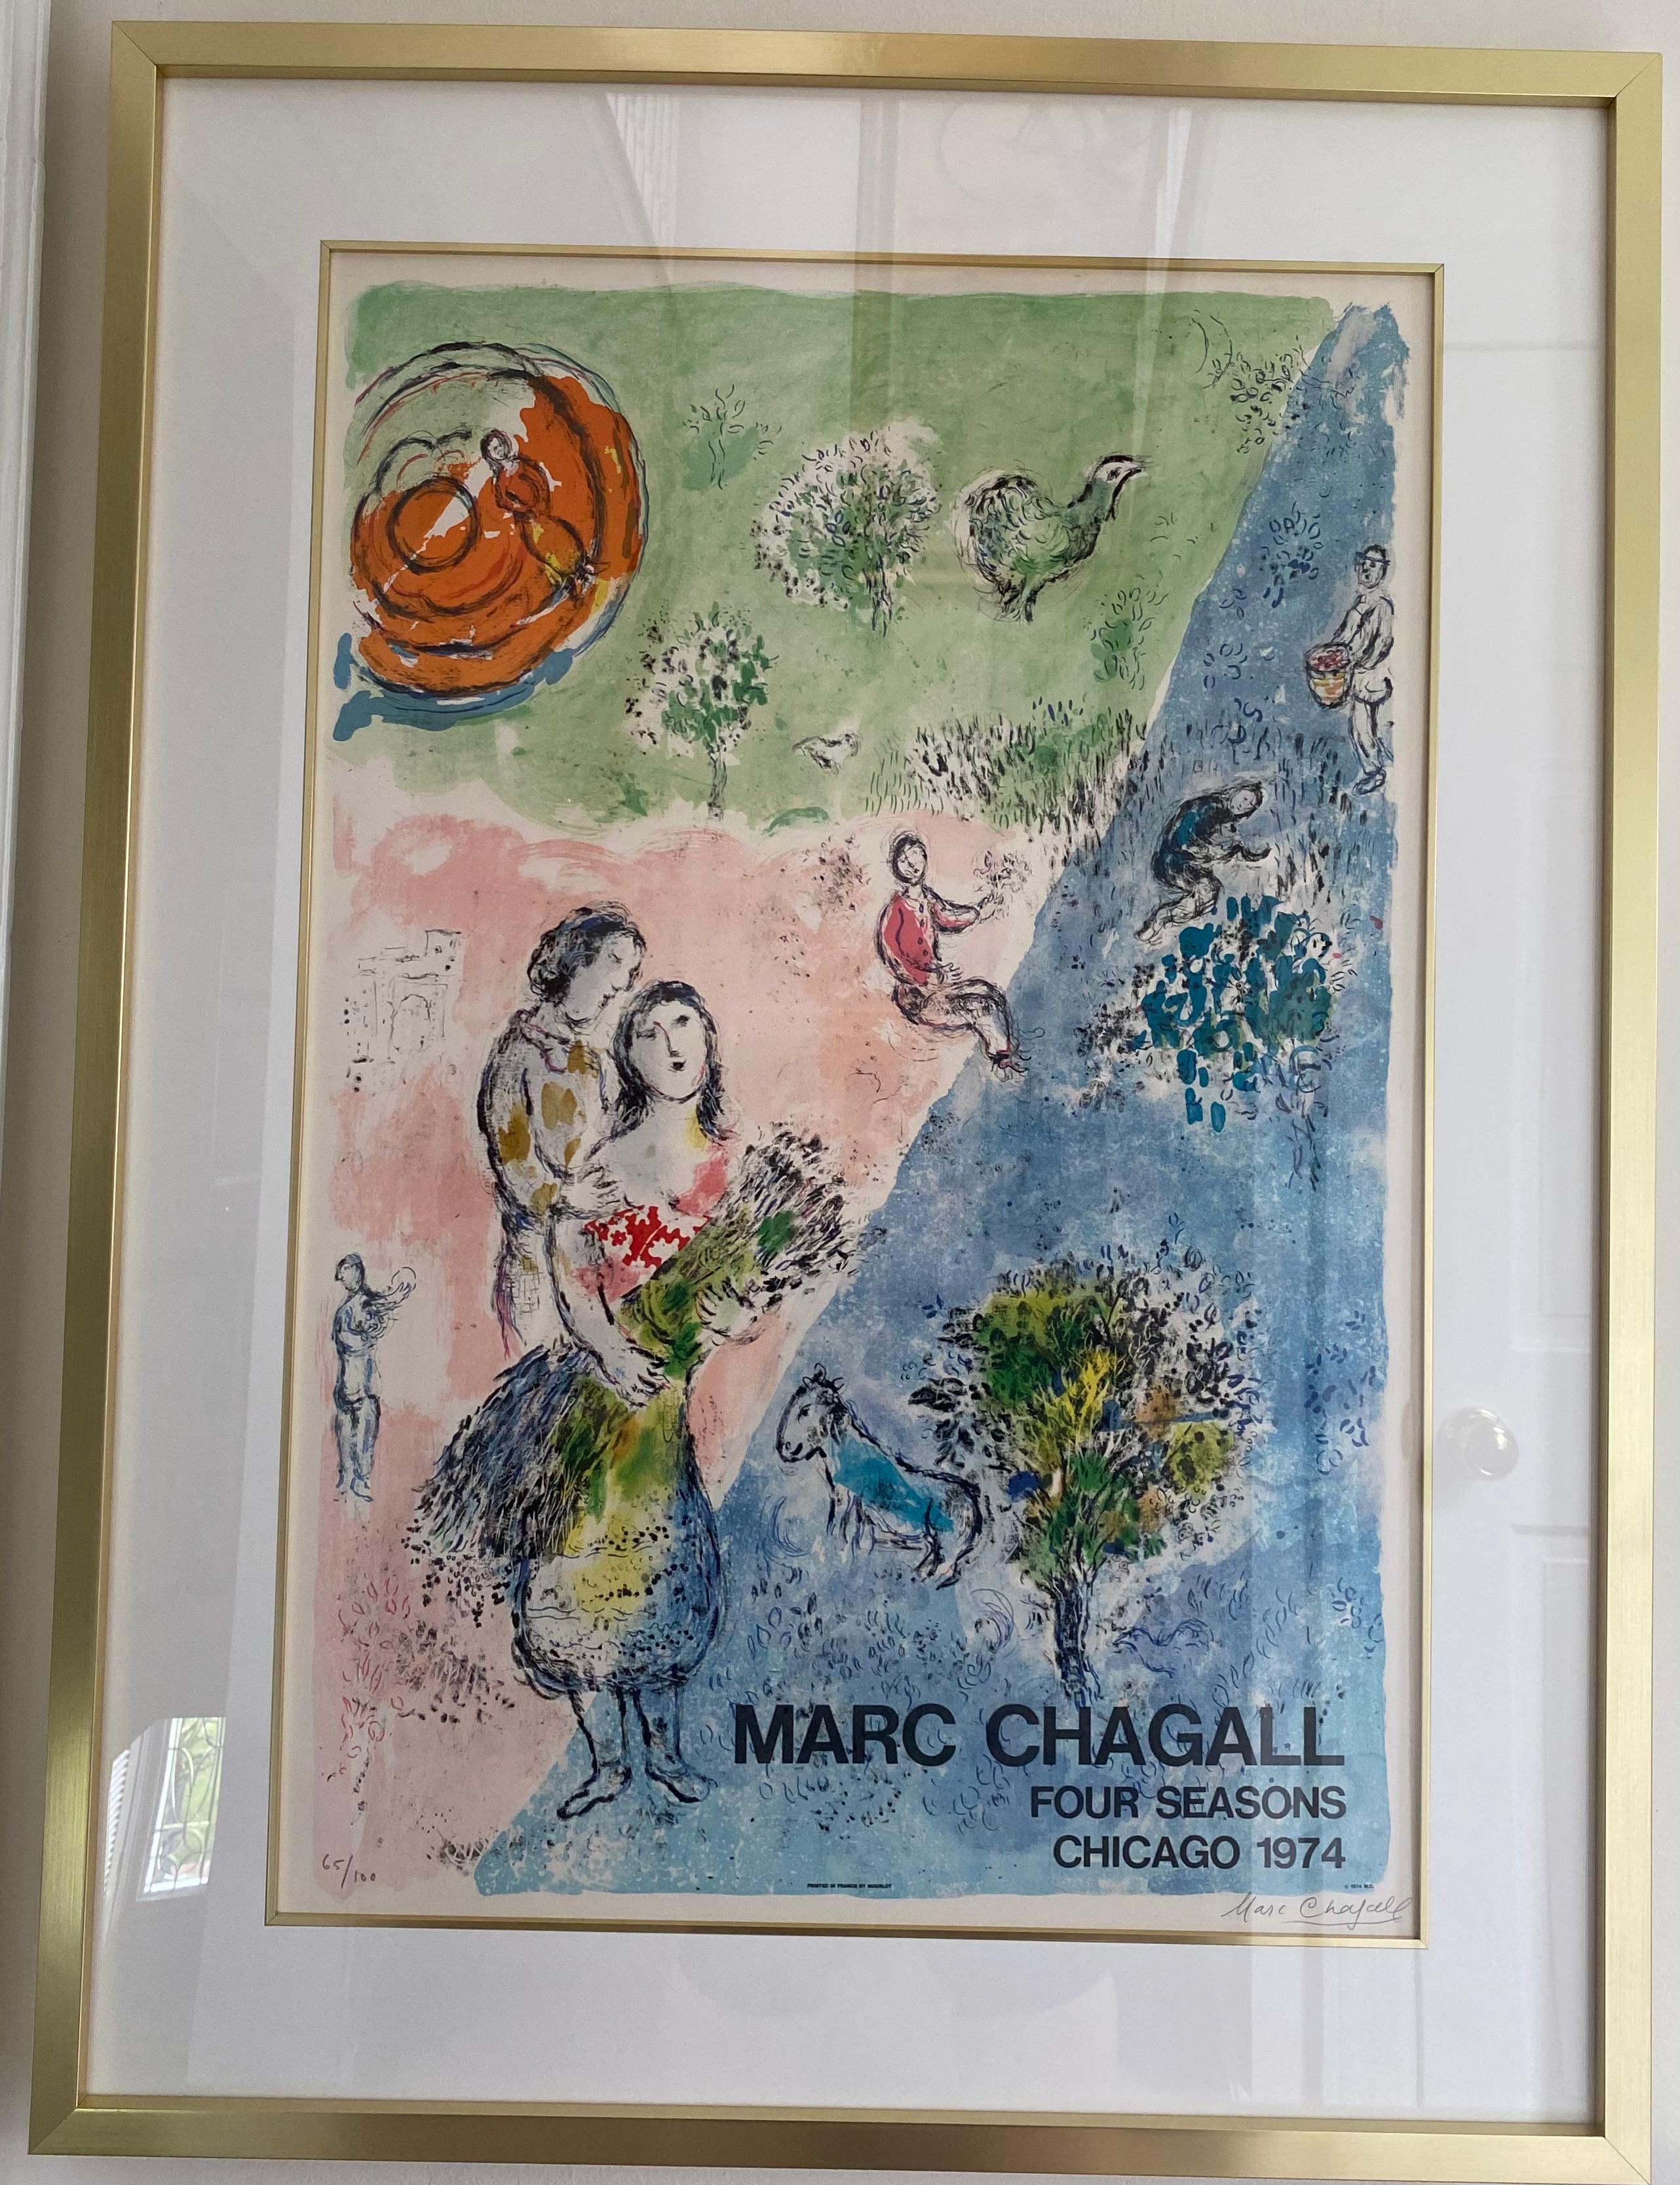 MARC CHAGALL
The Four Seasons.


Color lithograph, 1974. 
940x640 mm; 37x26 inches (sheet), full margins. 
The deluxe edition of 100. 
Signed and numbered 65/100 in pencil, lower margin. 
Printed by Mourlot, Paris. 
Published by The First National